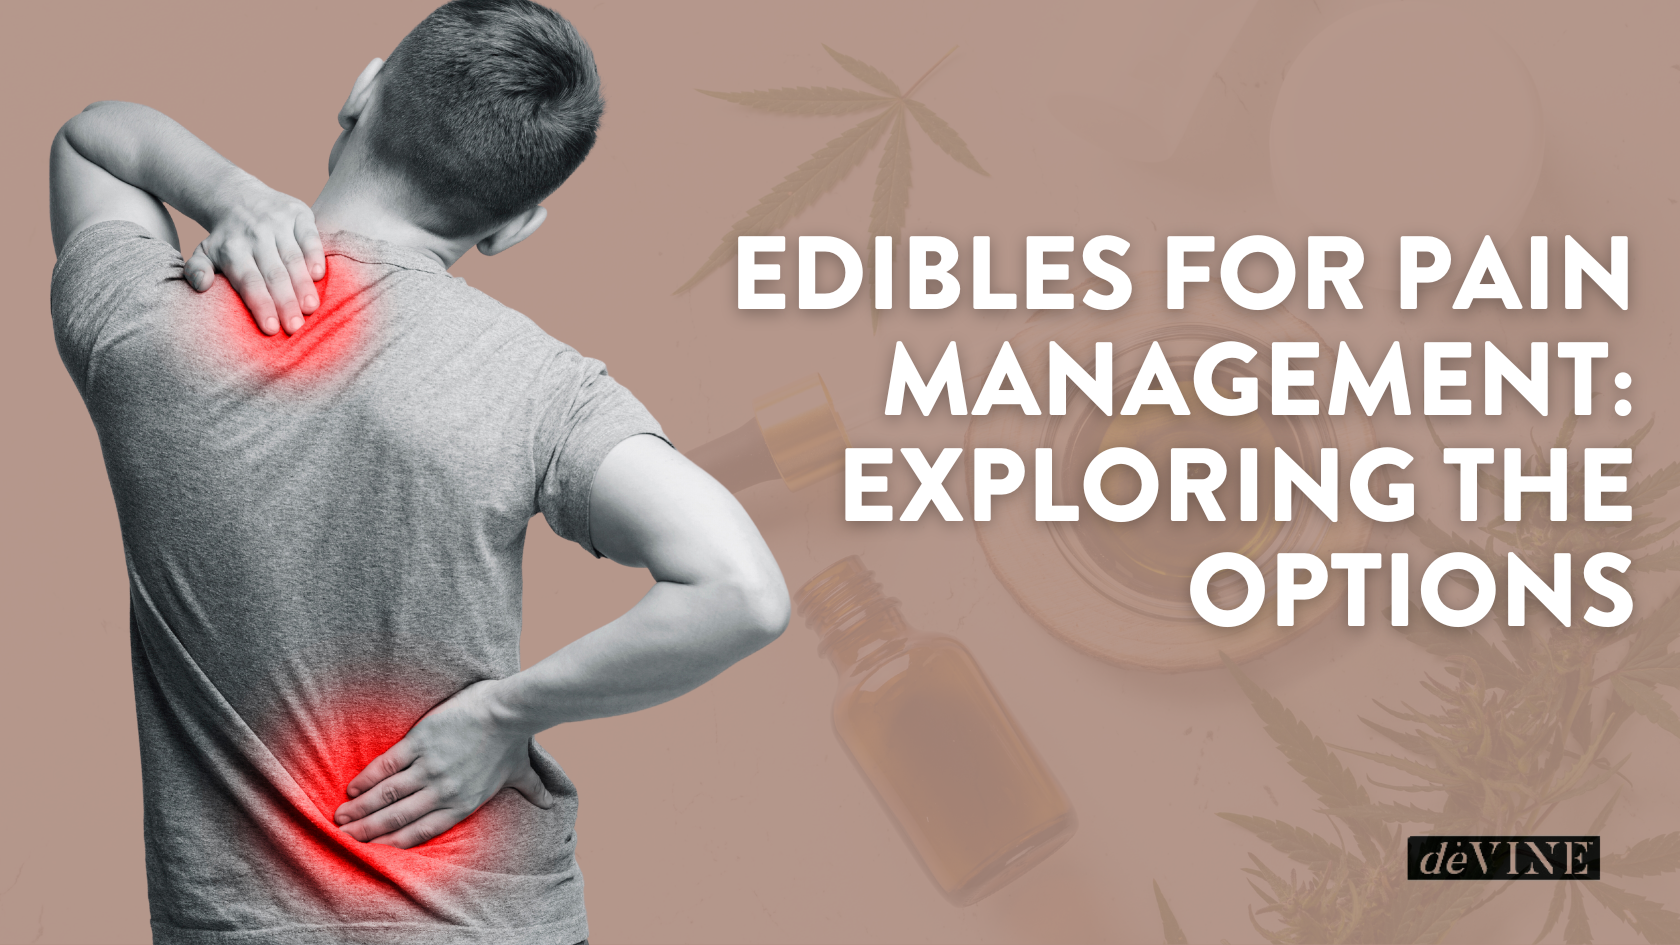 Edibles for Pain Management: Exploring the Options